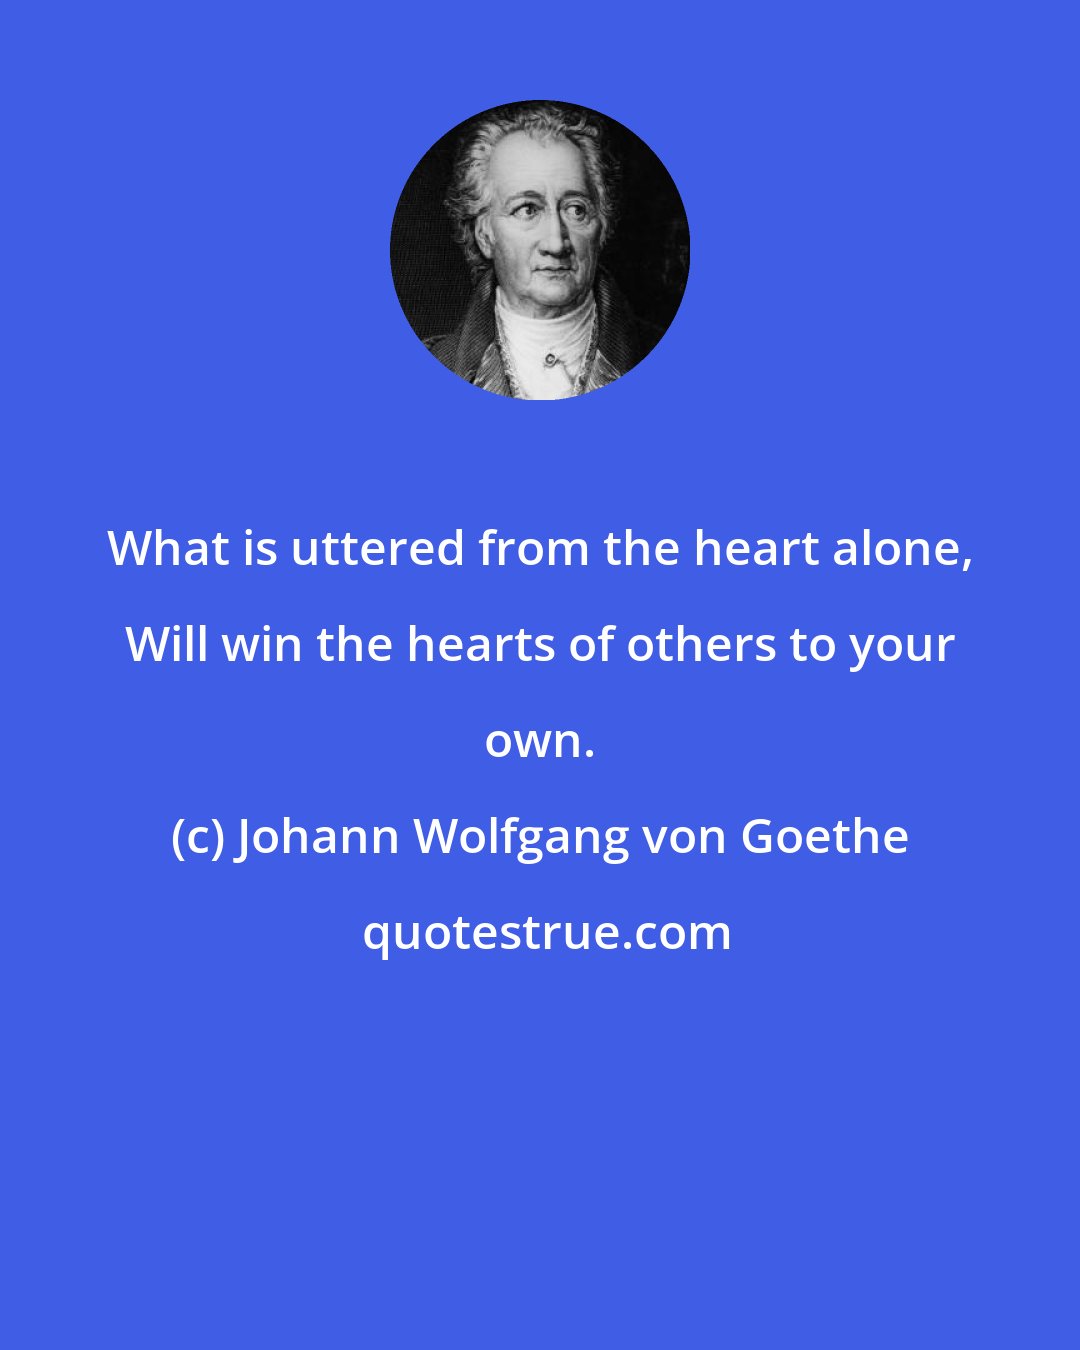 Johann Wolfgang von Goethe: What is uttered from the heart alone, Will win the hearts of others to your own.